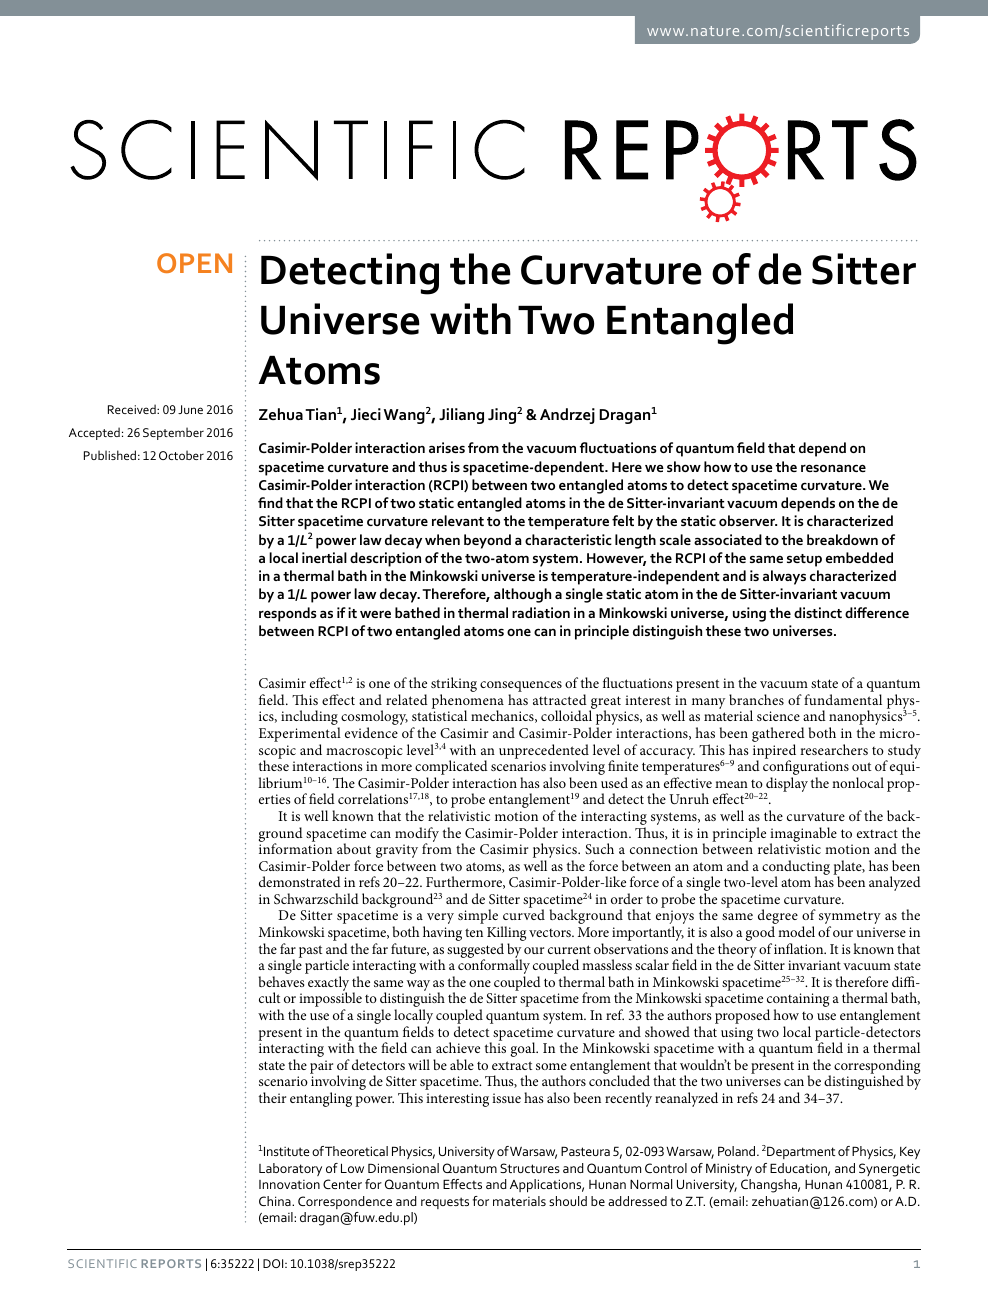 Detecting The Curvature Of De Sitter Universe With Two Entangled Atoms Topic Of Research Paper In Physical Sciences Download Scholarly Article Pdf And Read For Free On Cyberleninka Open Science Hub